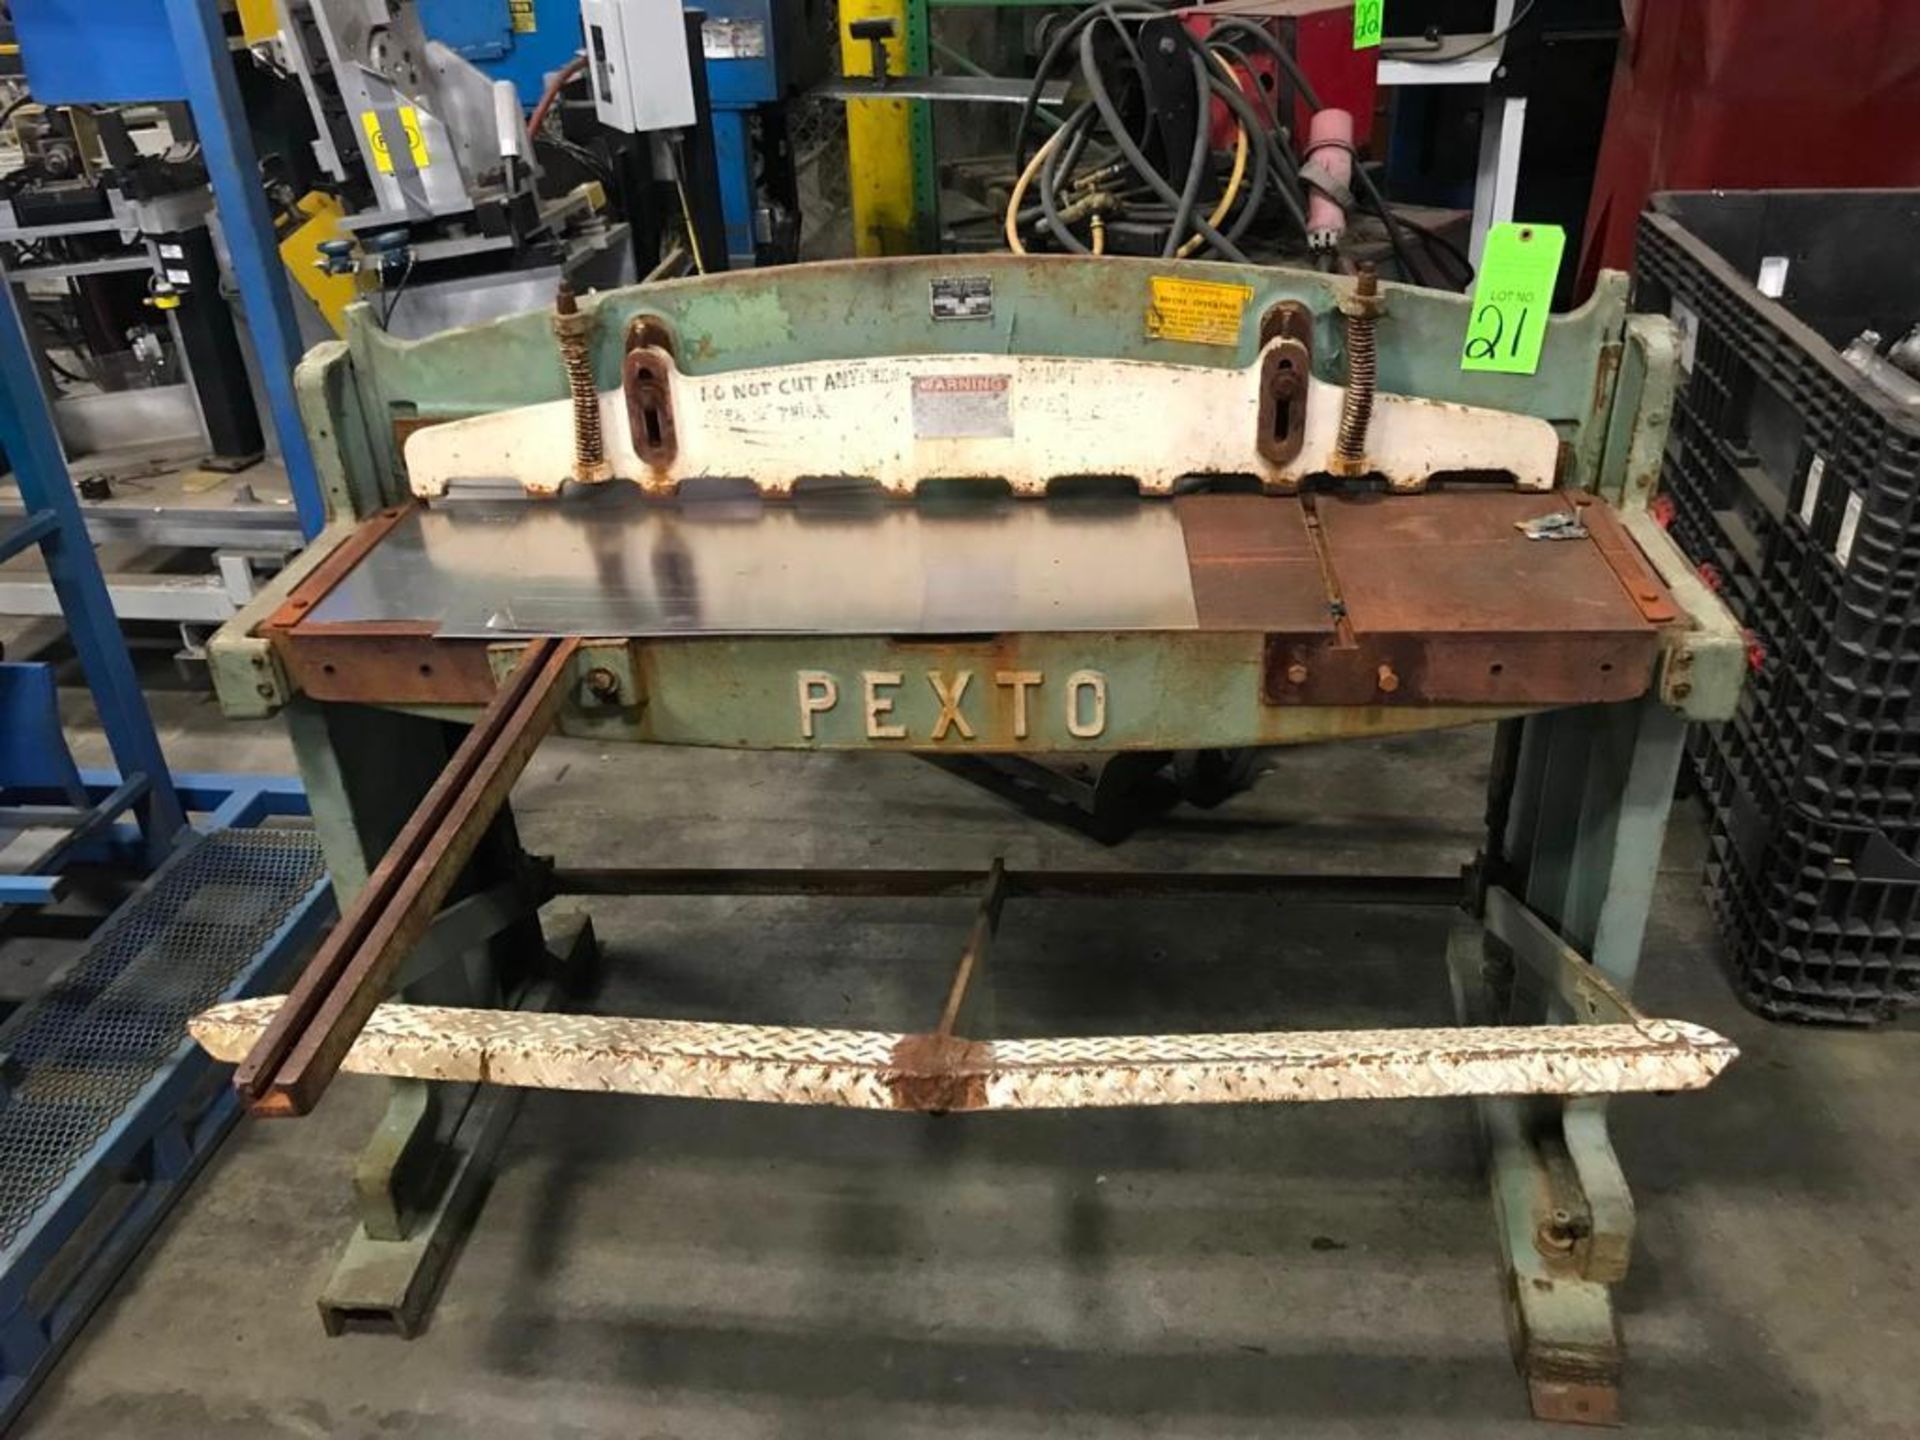 Pexto, mdl. 152-K, Foot Squaring Shear With Back Gauge - Image 4 of 4